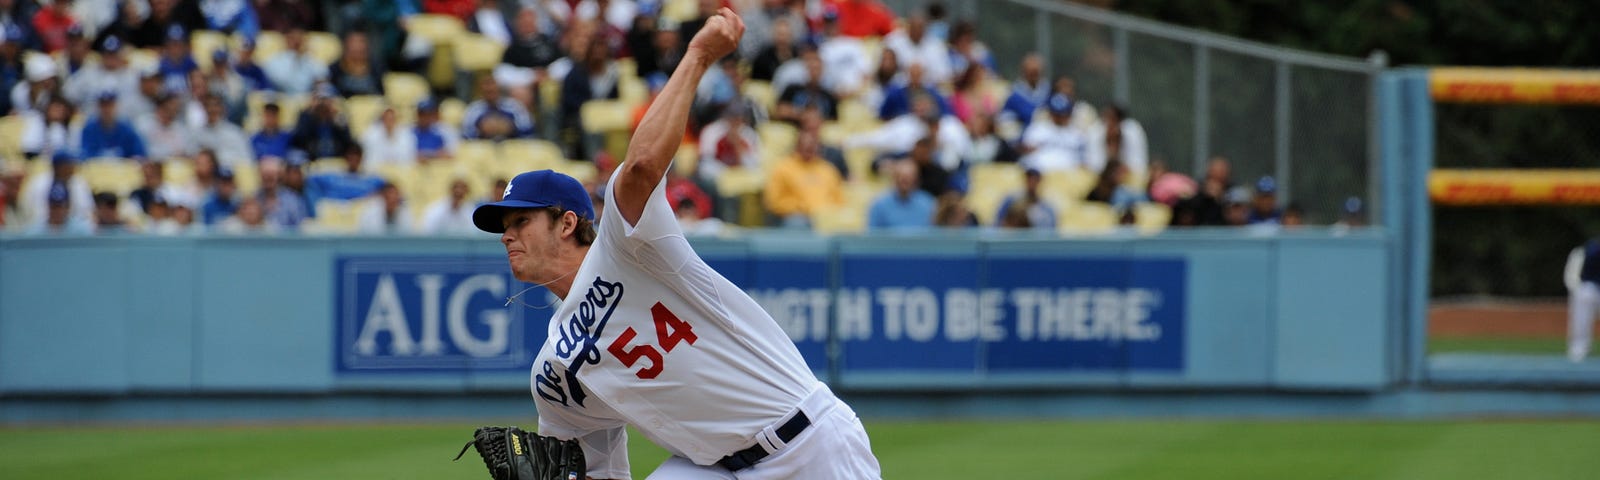 Welcome to the bigs: The story of Clayton Kershaw's MLB debut, by Cary  Osborne